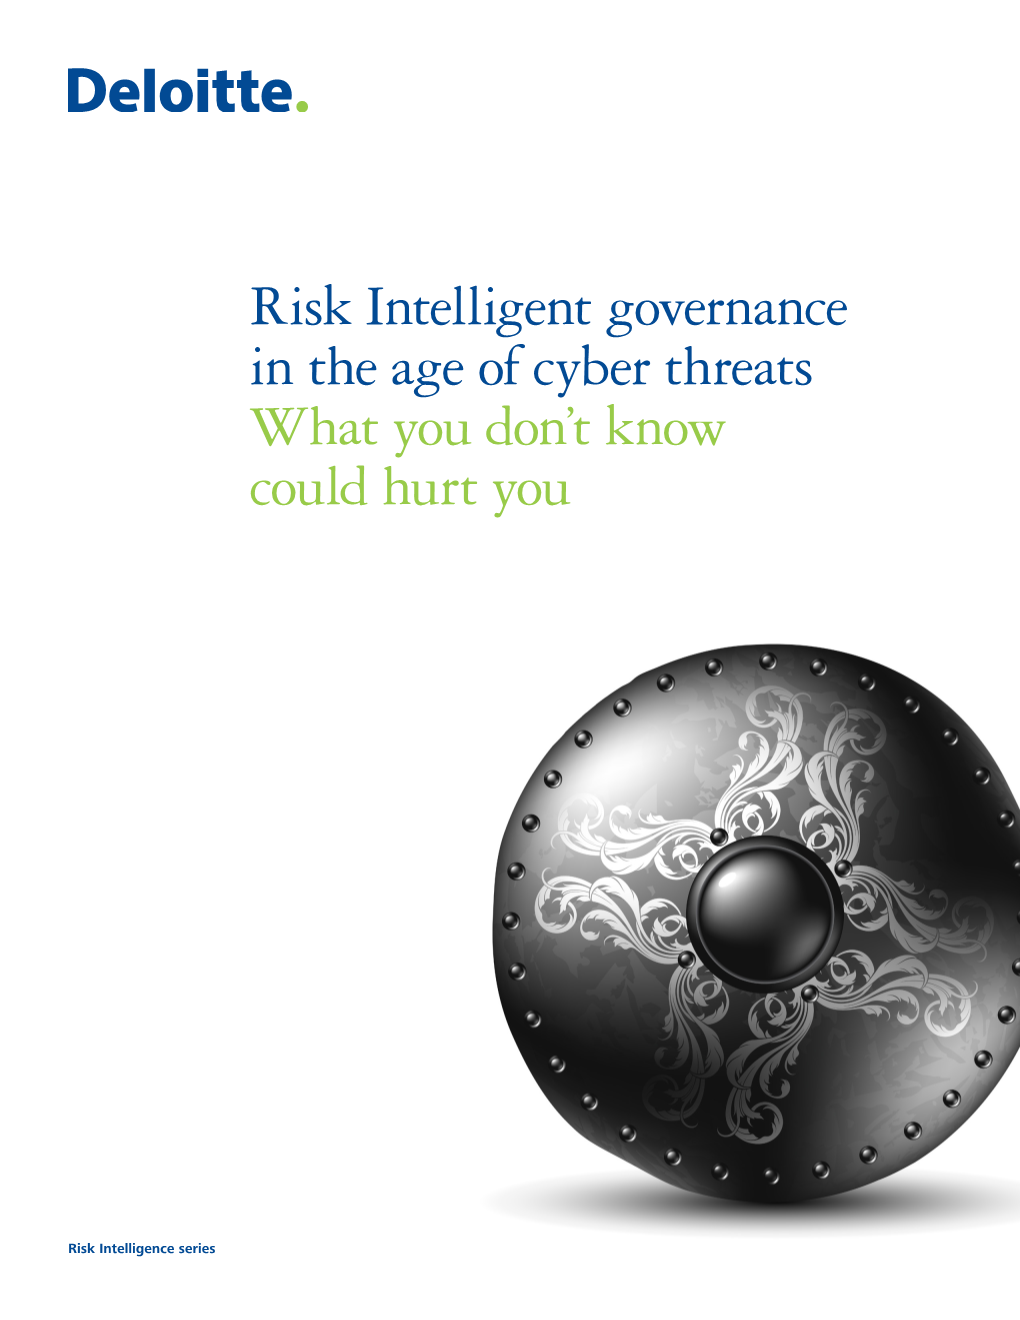 Risk Intelligent Governance in the Age of Cyber Threats What You Don’T Know Could Hurt You